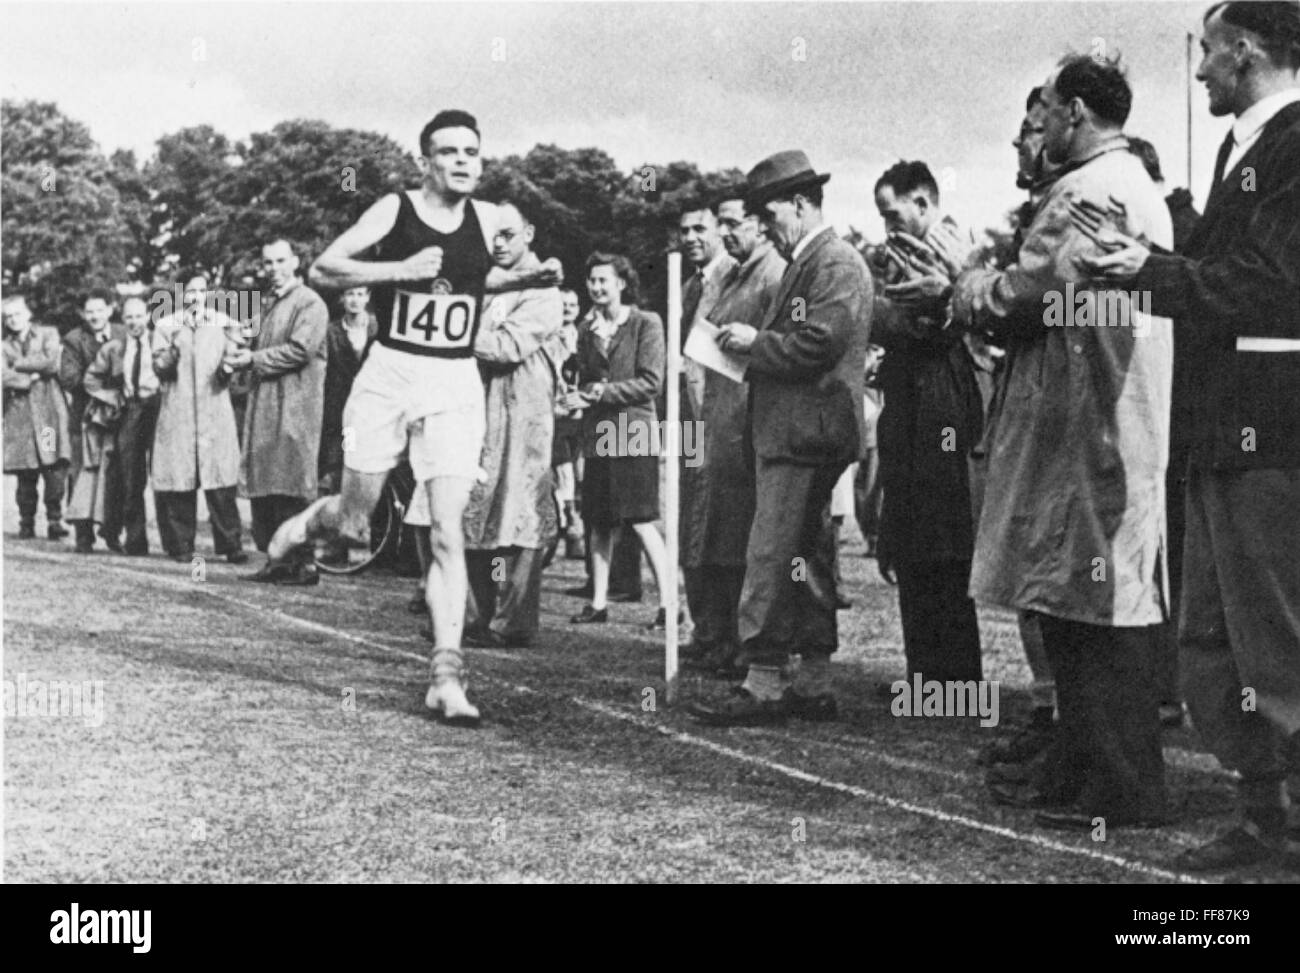 ALAN MATHISON TURING /n(1912-1954). English mathematician and logician. Finishing second in a three-mile race at Dorking, England in 1946. Stock Photo